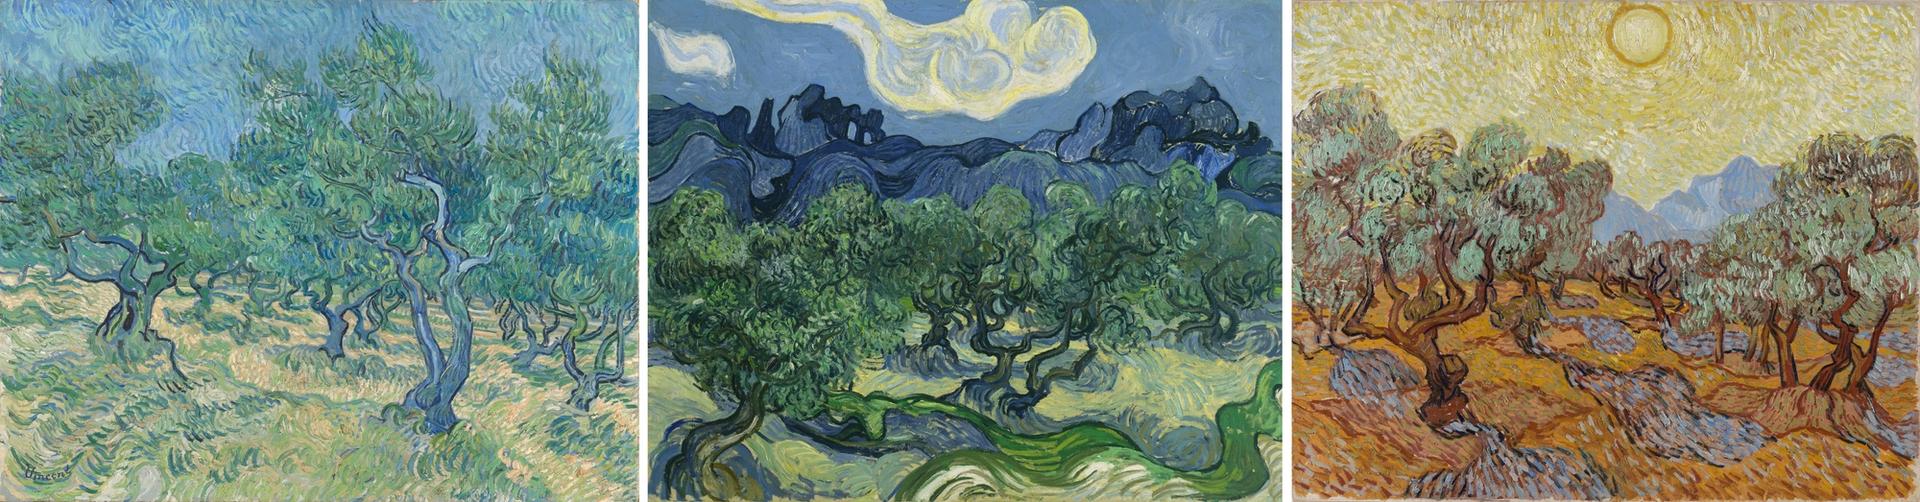 Van Gogh’s Olive Grove (July 1889), Olive Trees (June 1889) and Olive Trees (June 1889) Courtesy of Kröller-Müller Museum, Otterlo (photo: Rik Klein Gotink); Museum of Modern Art, New York (license: SCALA/Art Resource); and Minneapolis Institute of Art (William Hood Dunwoody Fund, 51.7)